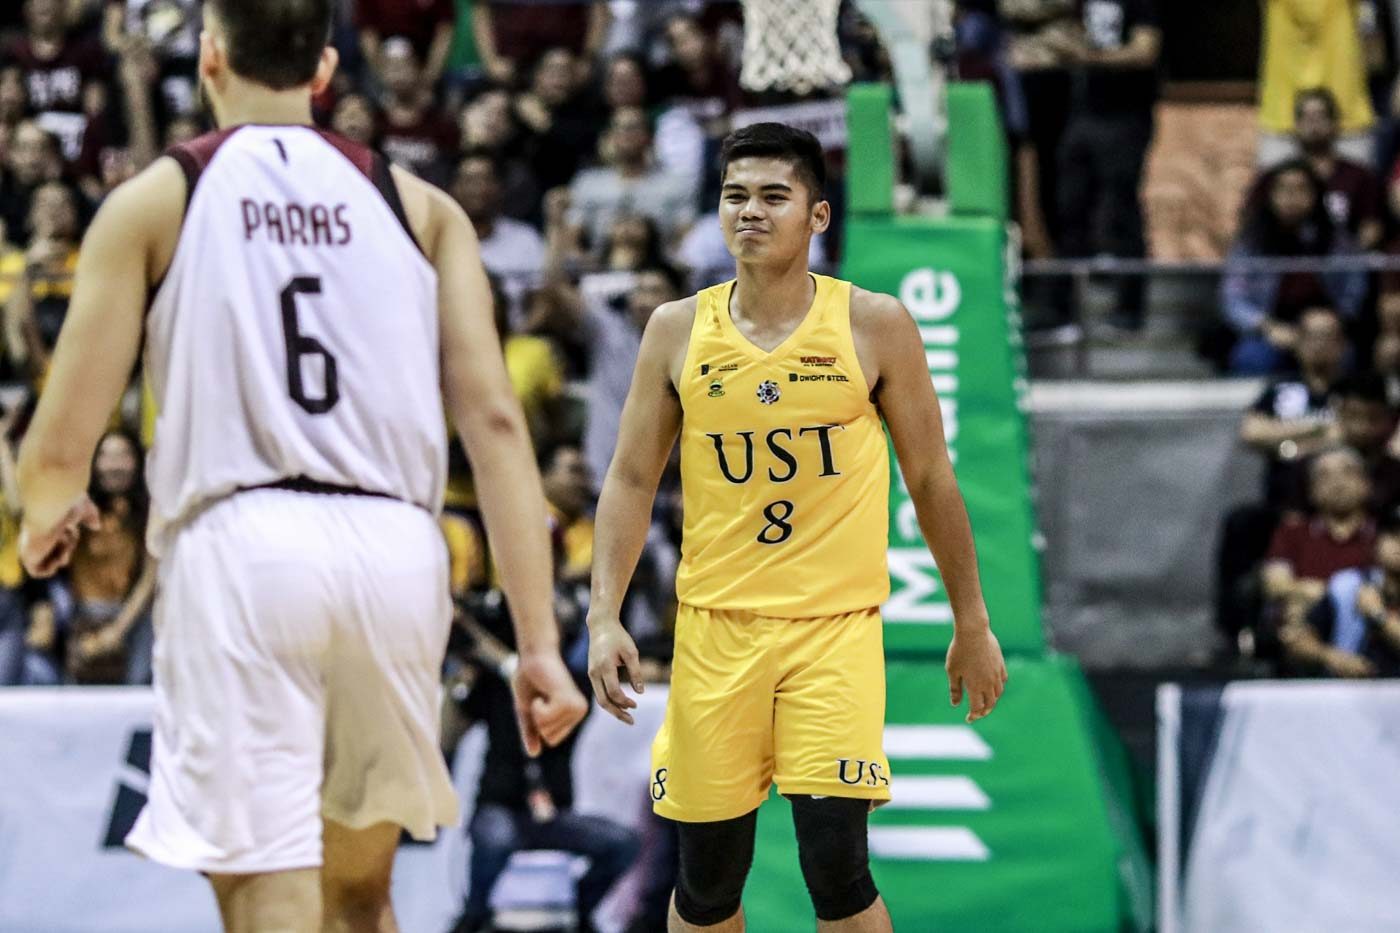 SIZZLING. Rookie Sherwin Concepcion plays the role of fireman for the Growling Tigers, drilling timely treys as he goes 4-of-8 from beyond the arc. Photo by Michael Gatpandan/Rappler  